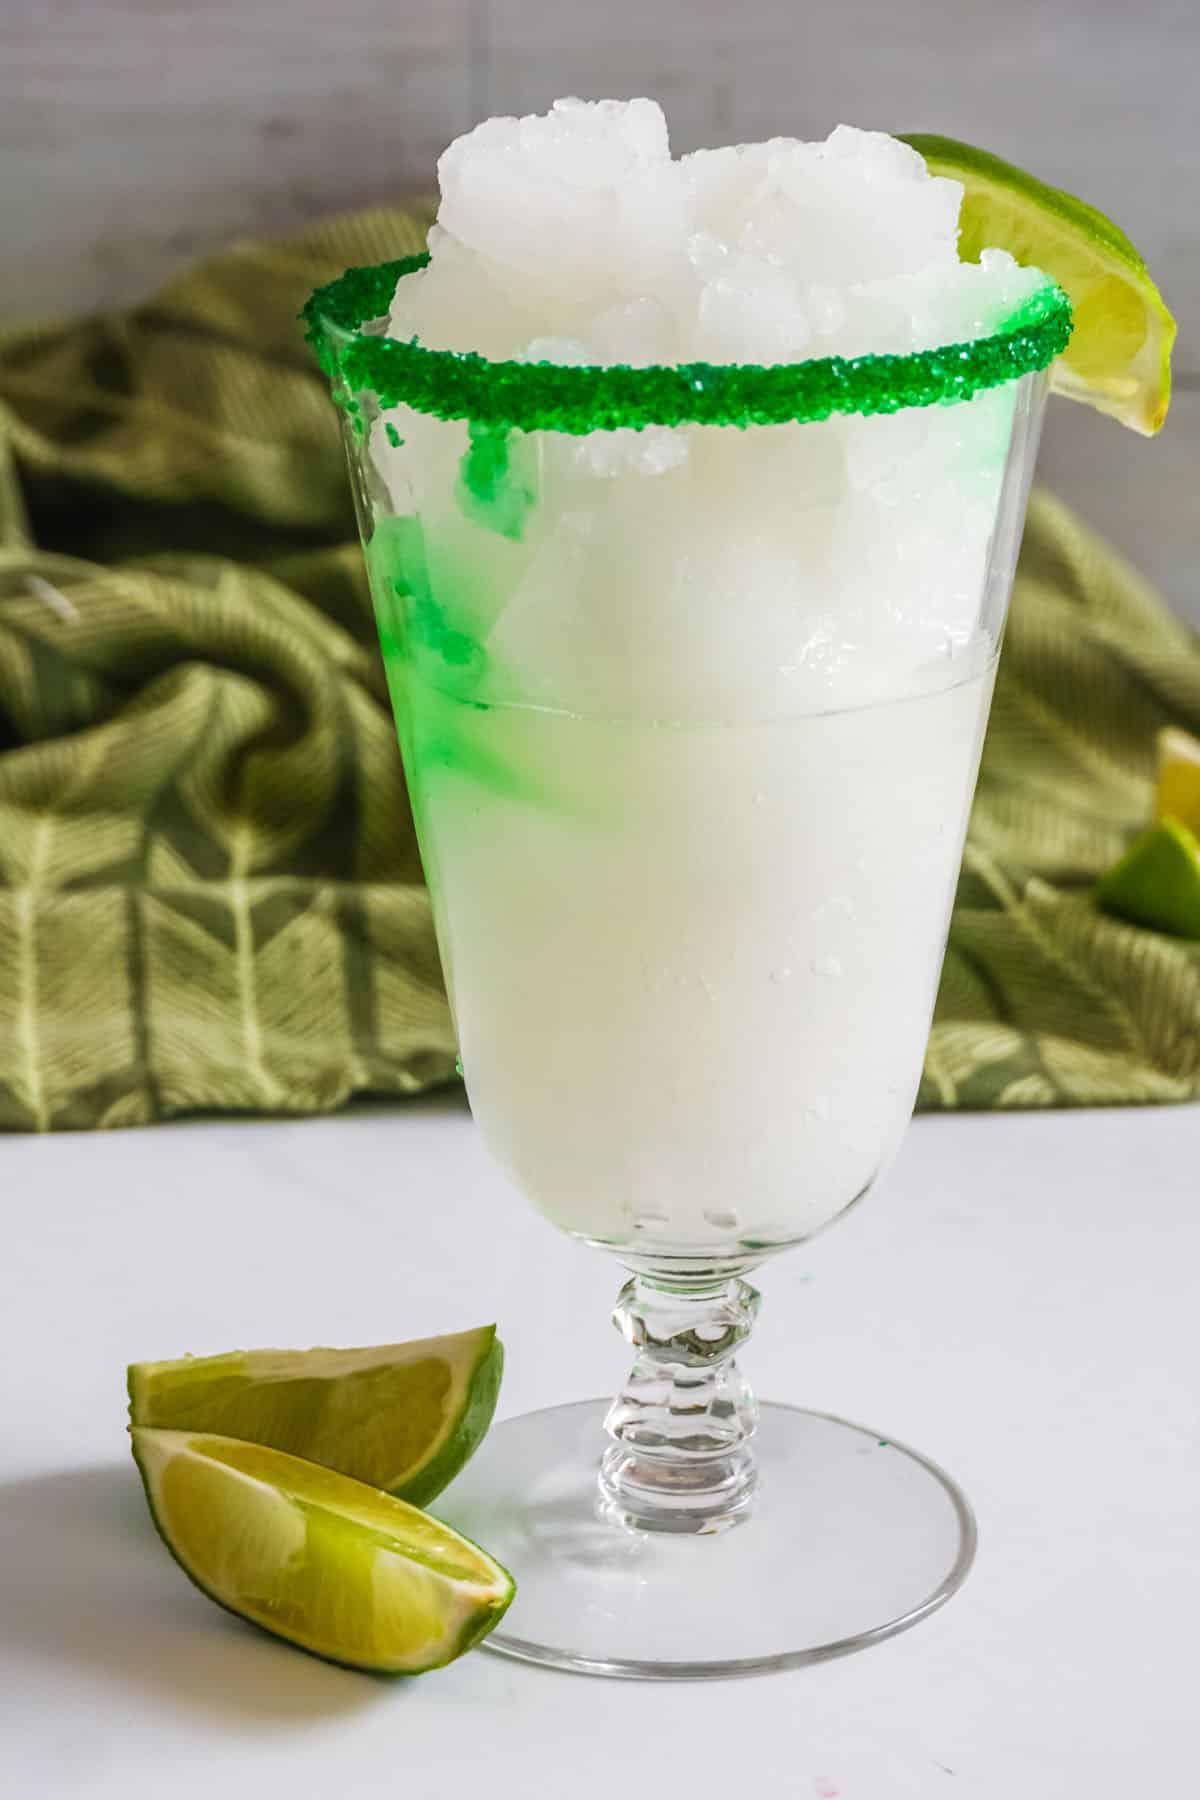 Lime slices, on top of Frozen Limeade.